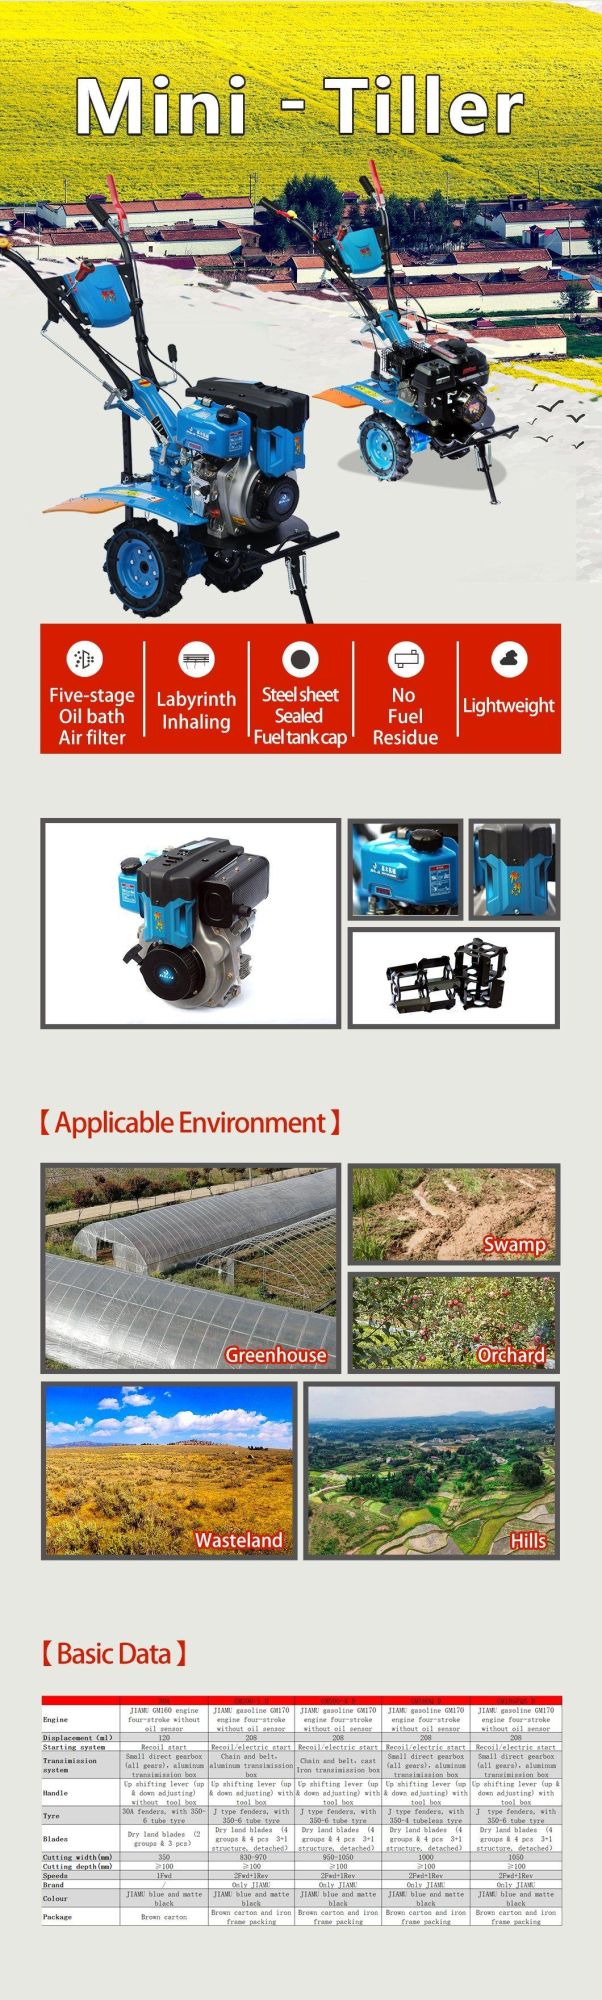 Jiamu GM500-1 D with GM170 All Gear Aluminum Transmission Box Agricultural Machinery Recoil Start Petrol D-Style Rotary Tiller